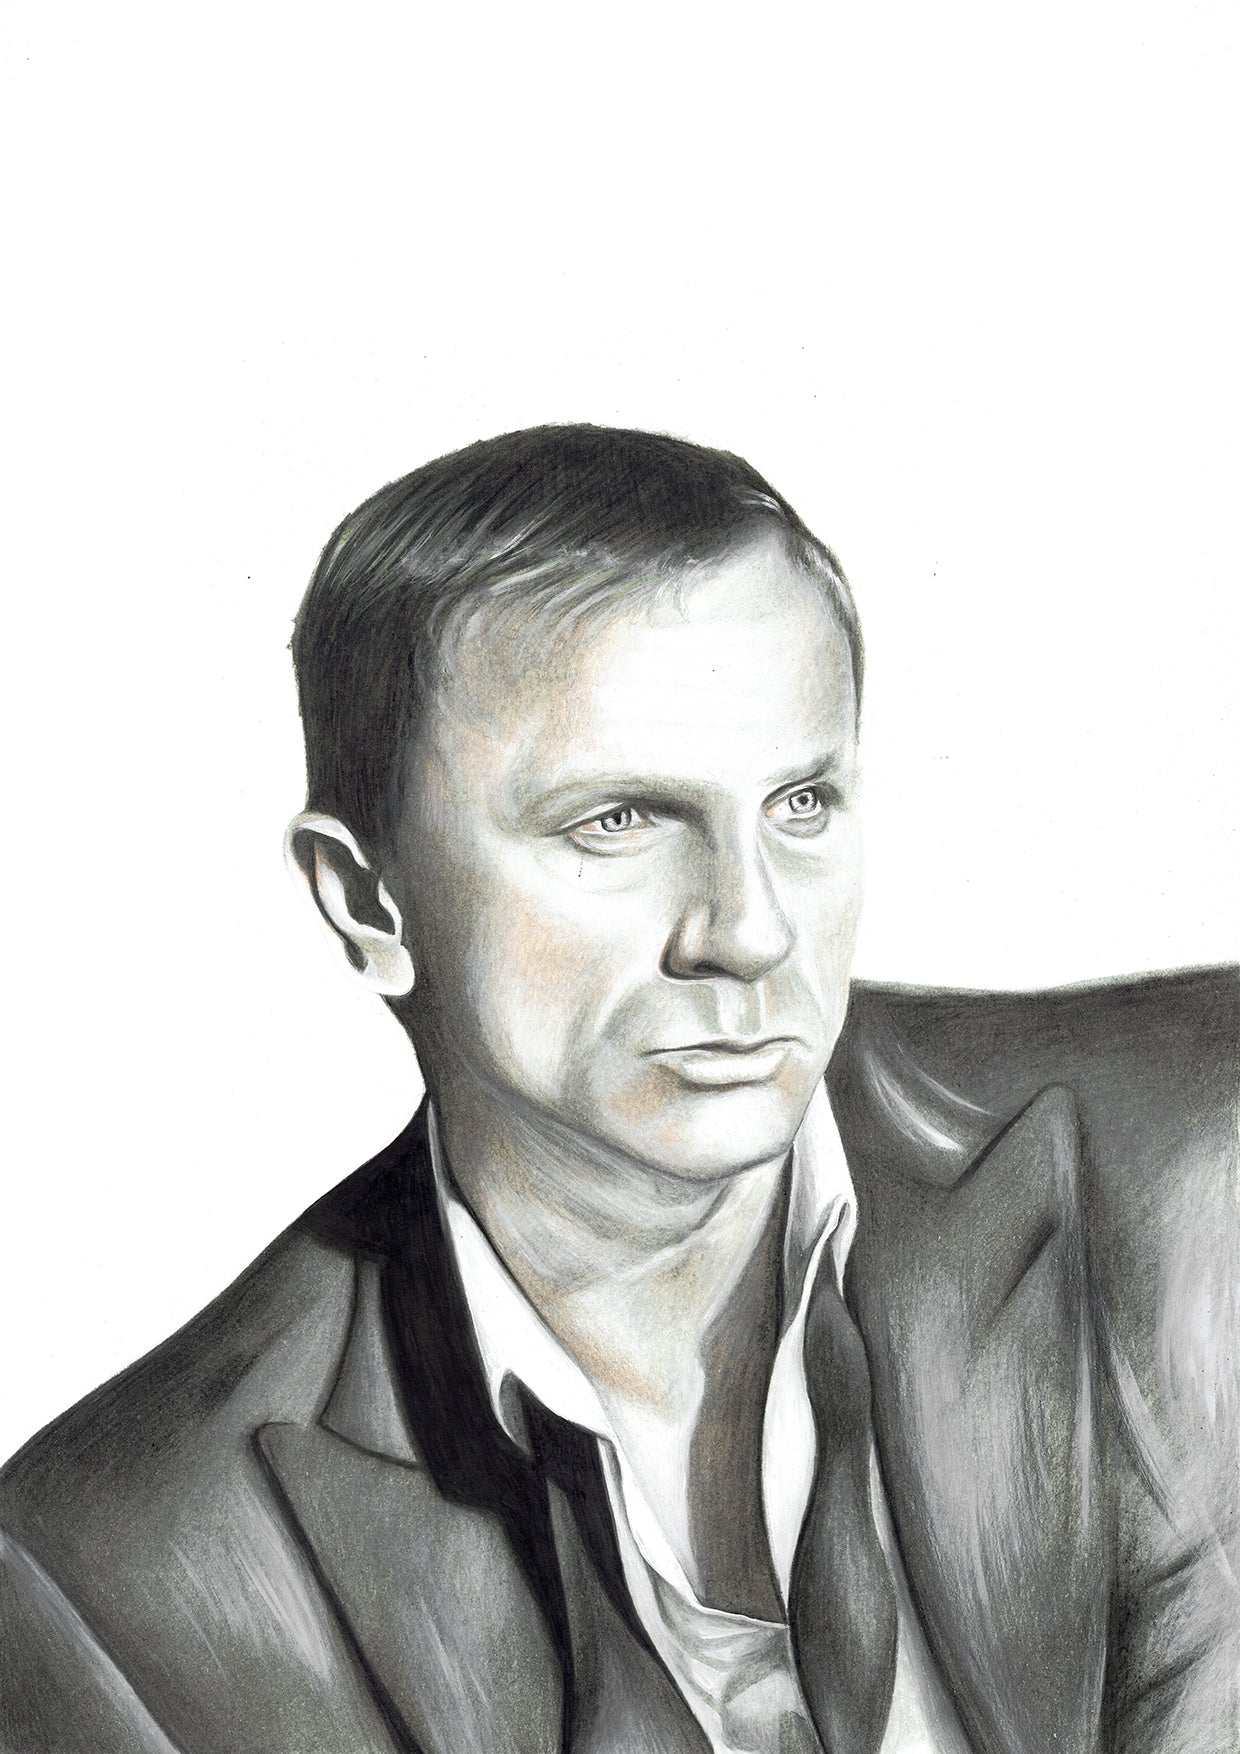 Wall Street Journal Hedcut Portraits of Harrison Ford and Daniel Craig —  Pen & Ink Stipple Portraits for The Los Angeles Times